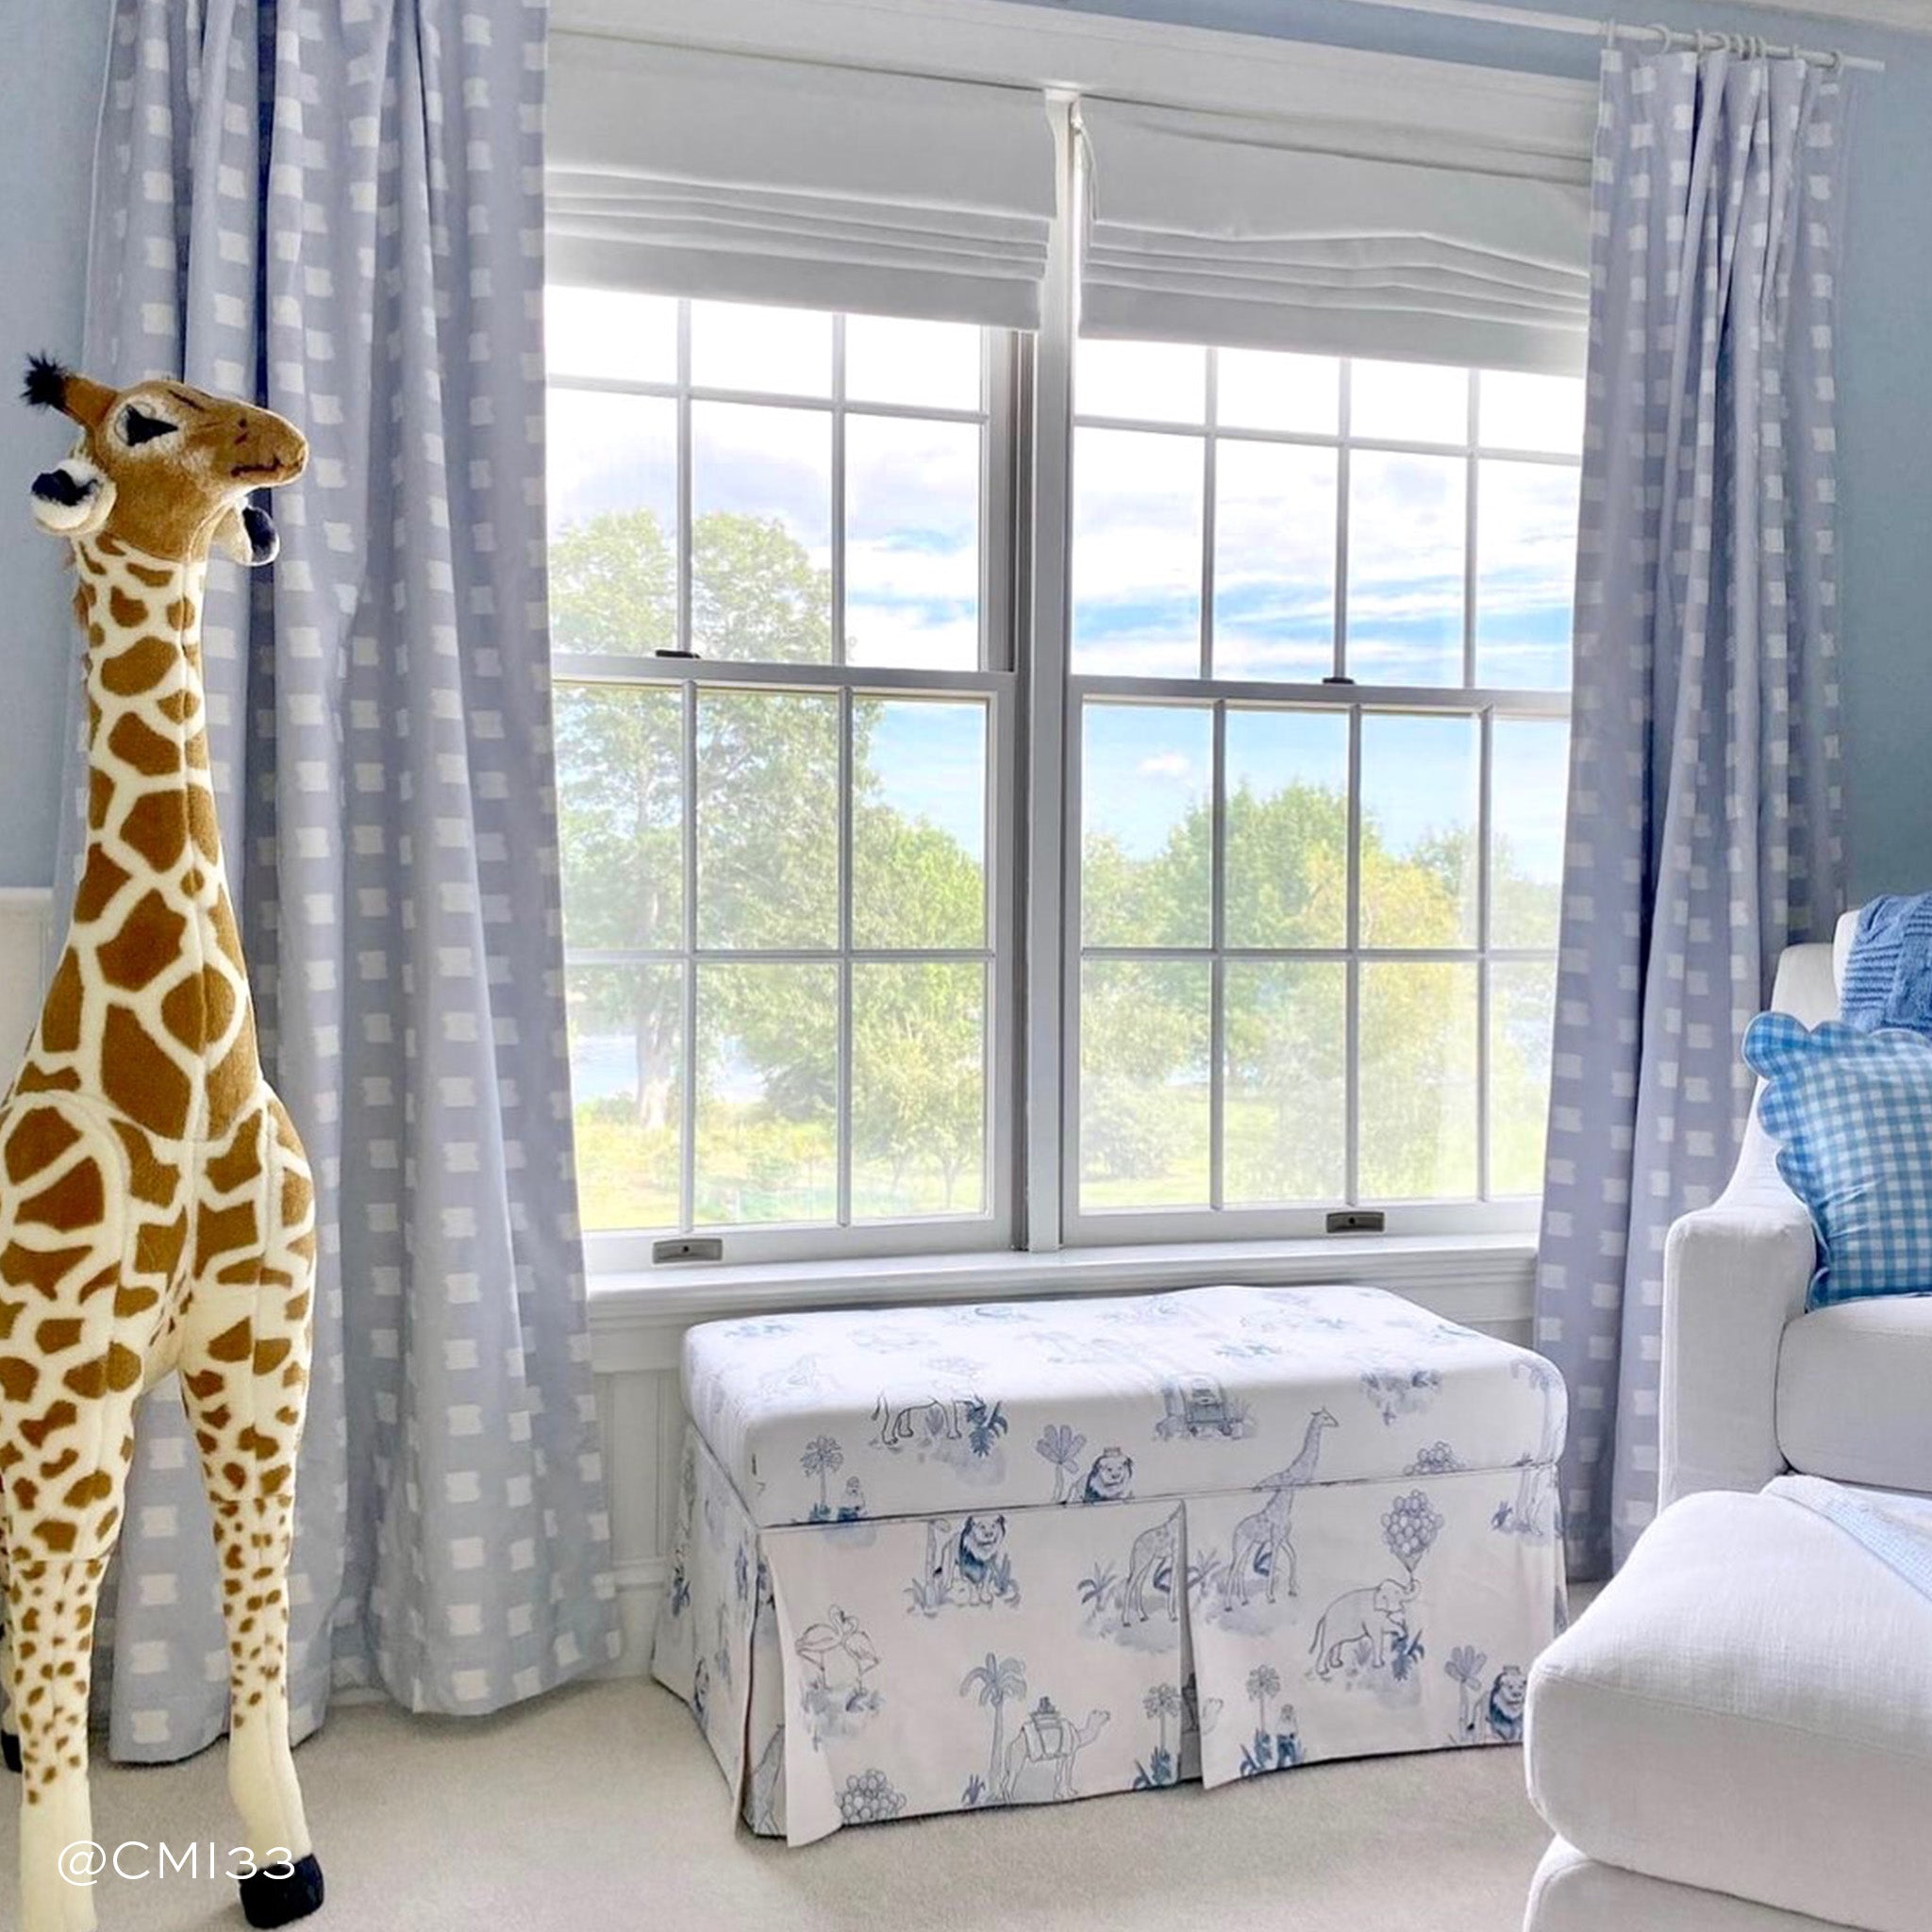 Nursery Room Styled with Sky Blue Pattern Printed Curtains with giraffe in front with white furniture. Photo taken by CMI33